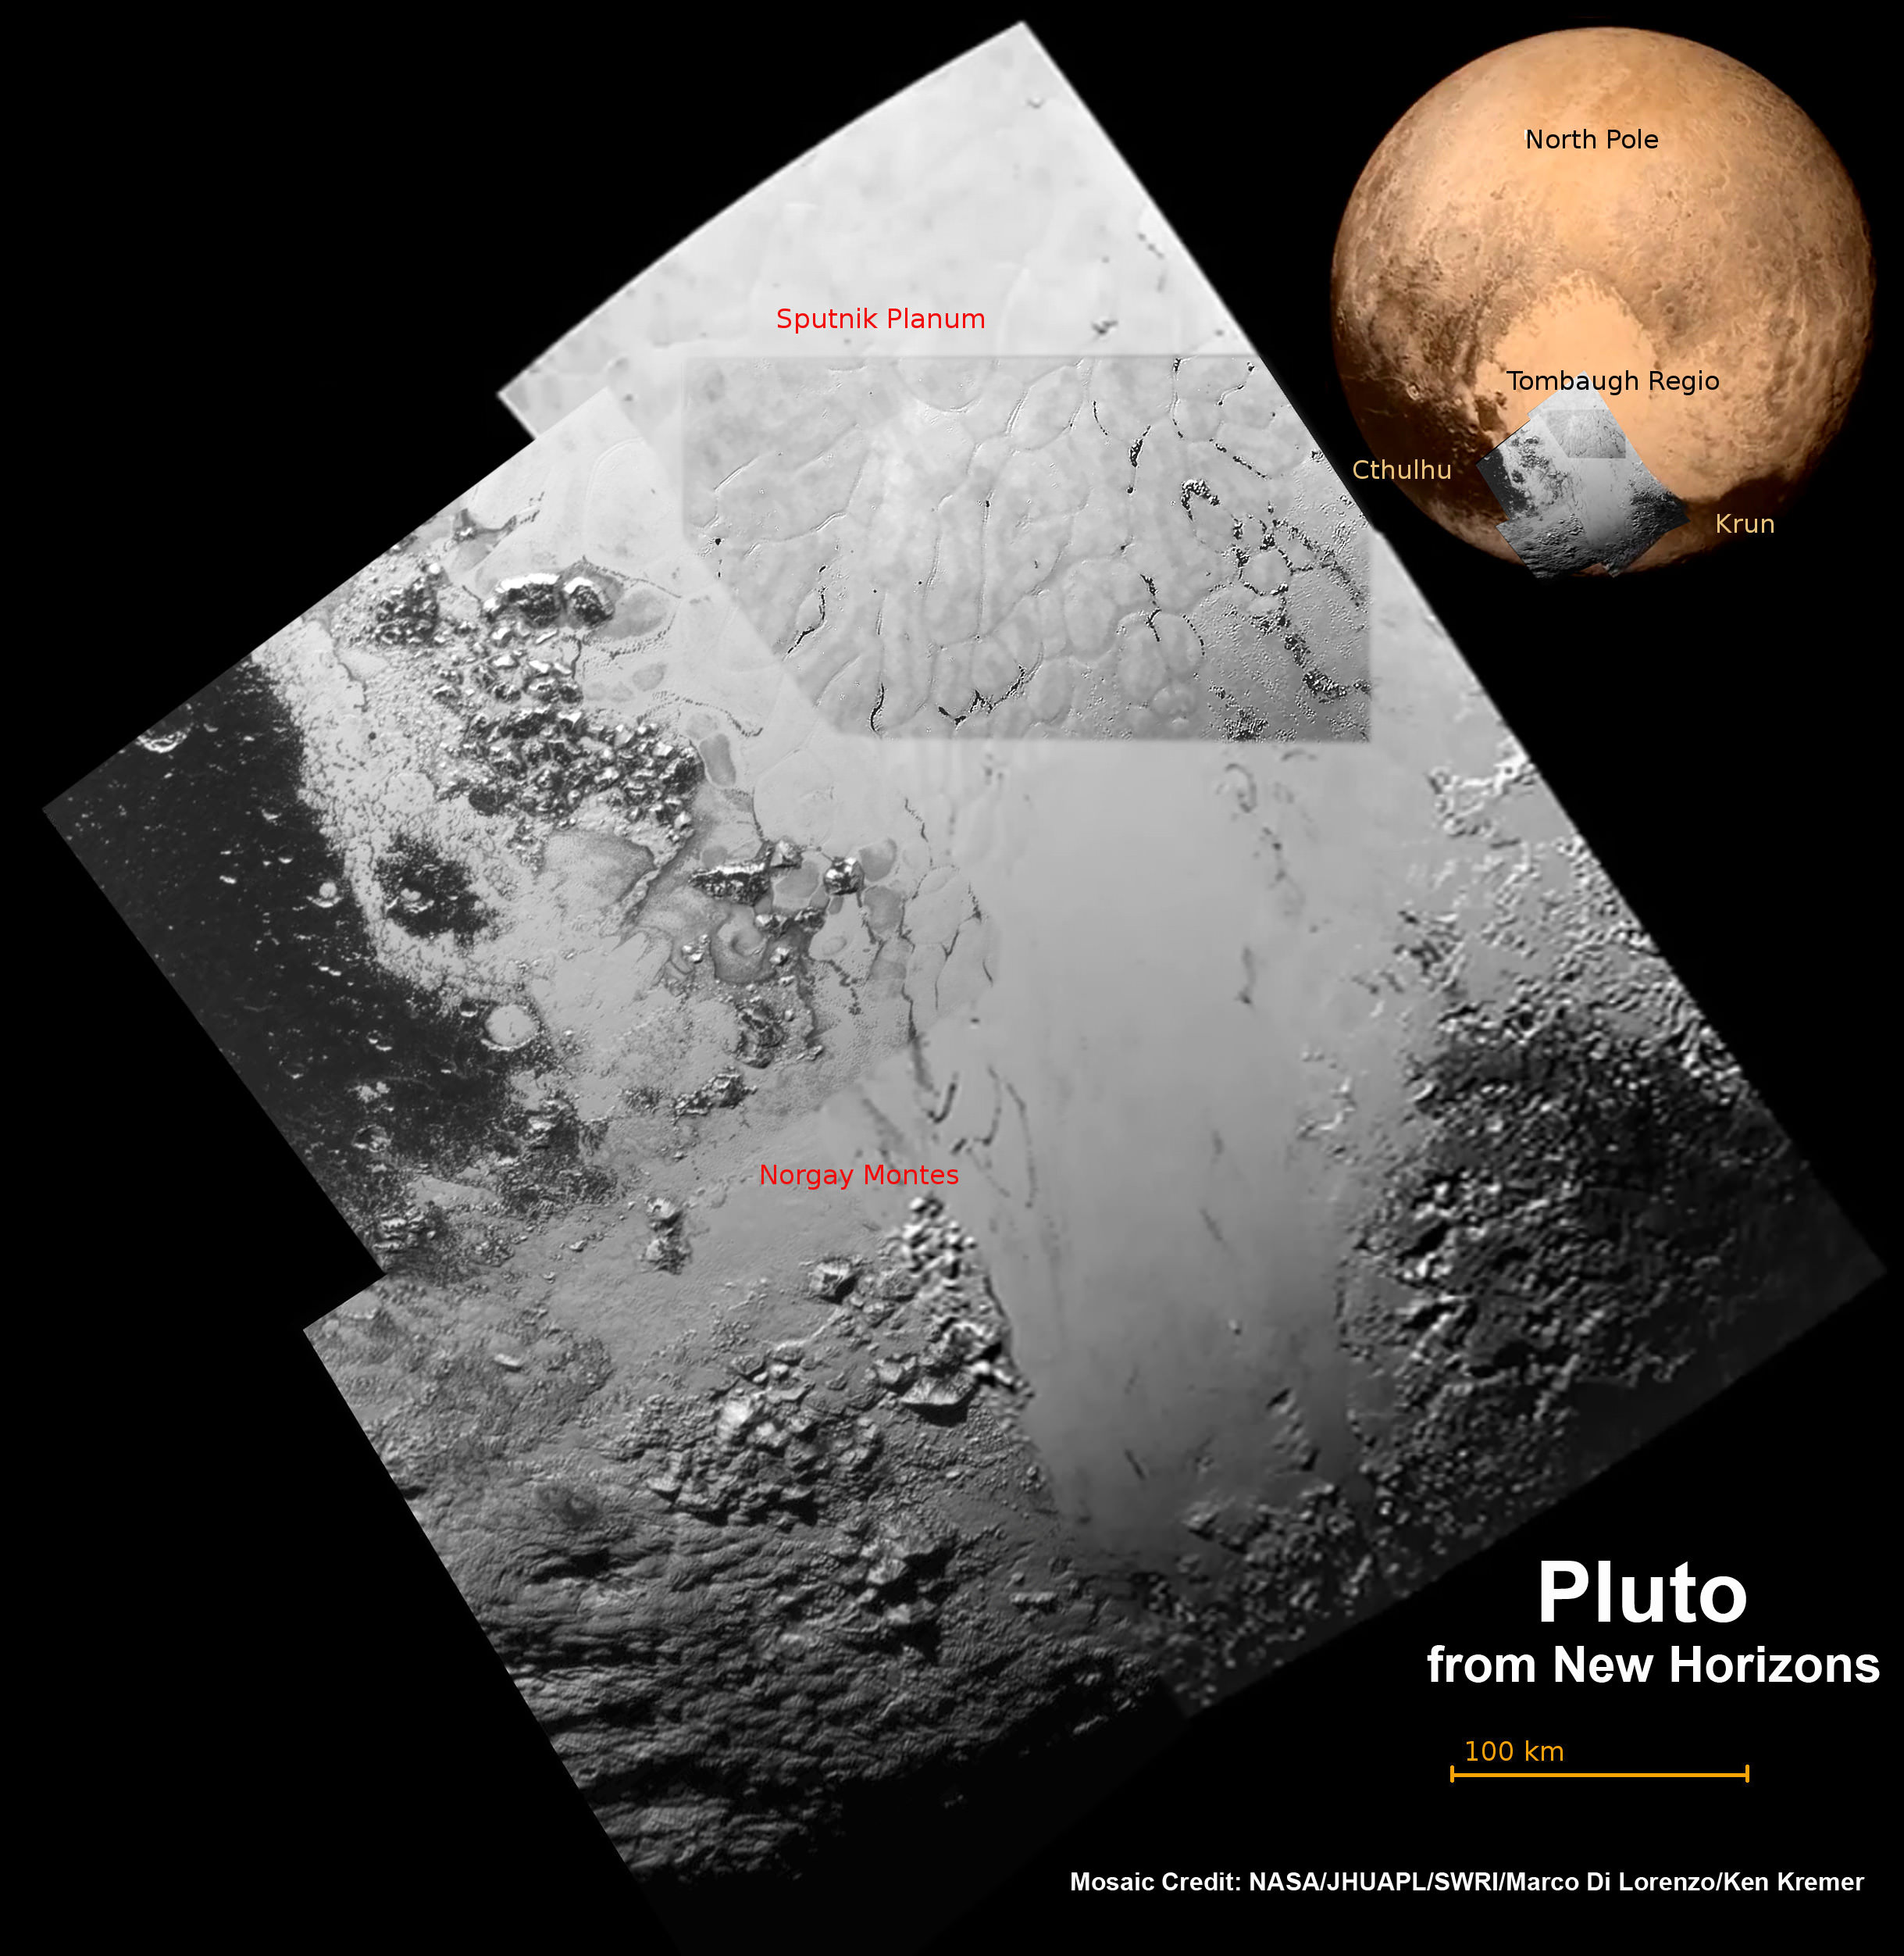 Hi Res mosaic of ‘Tombaugh Regio’ shows the heart-shaped region on Pluto and focuses on icy mountain ranges of ‘Norgay Montes’ and ice plains of ‘Sputnik Planum.’ The new mosaic combines highest resolution imagery captured by NASA’s New Horizons LORRI imager during history making closest approach flyby on July 14, 2015, draped over a wider, lower resolution view of Tombaugh Regio.   Inset at left shows possible wind streaks.  Inset at right shows global view of Pluto with location of huge heart-shaped region in context.  Annotated with place names.  Credit: NASA/JHUAPL/SWRI/ Marco Di Lorenzo/Ken Kremer/kenkremer.com  